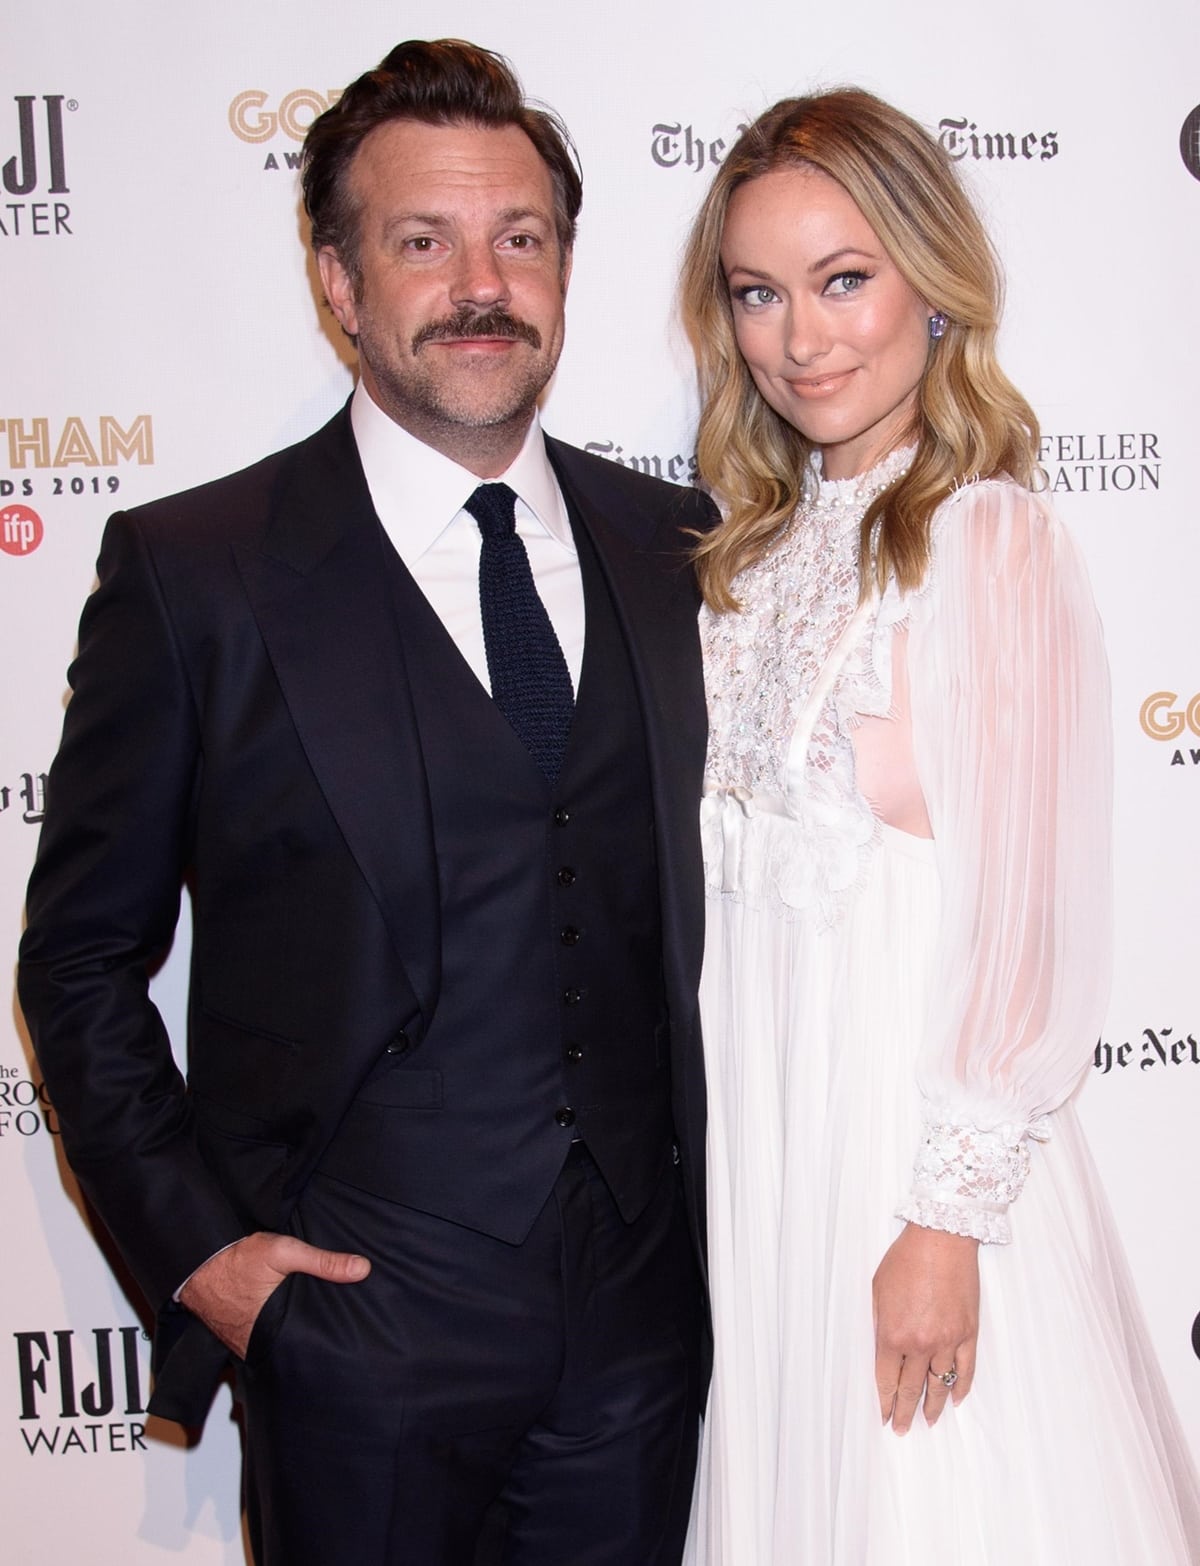 Olivia Wilde is slightly shorter and almost 10 years younger than Jason Sudeikis